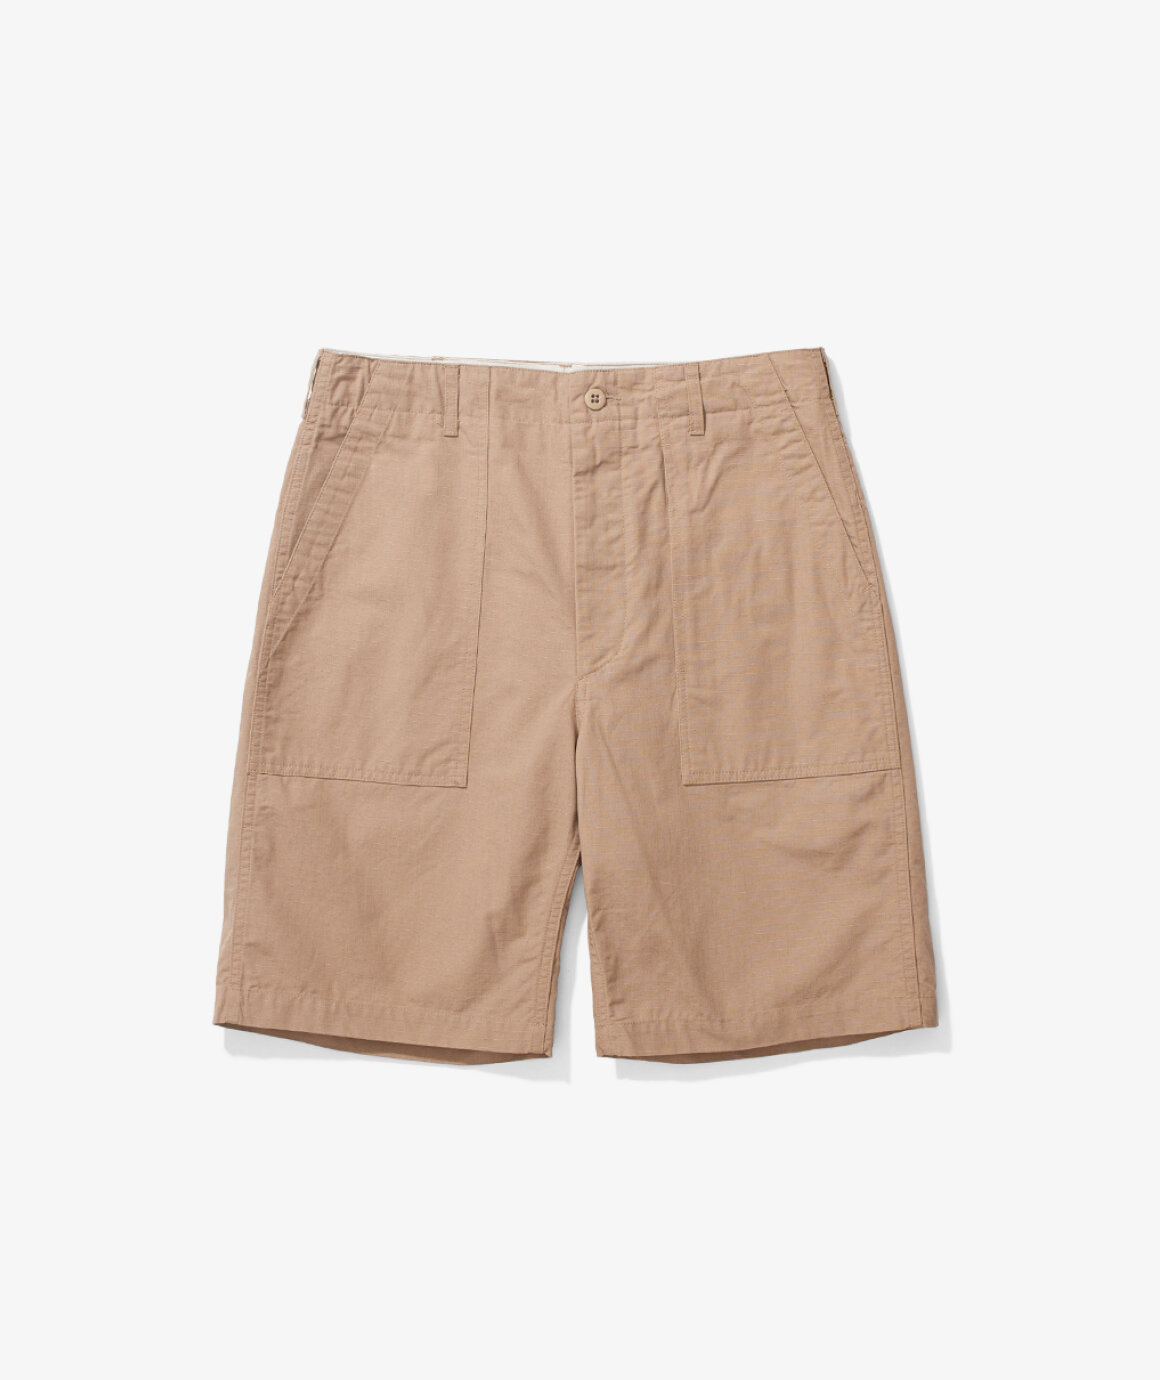 Norse Store | Shipping Worldwide - Shorts - Engineered Garments ...